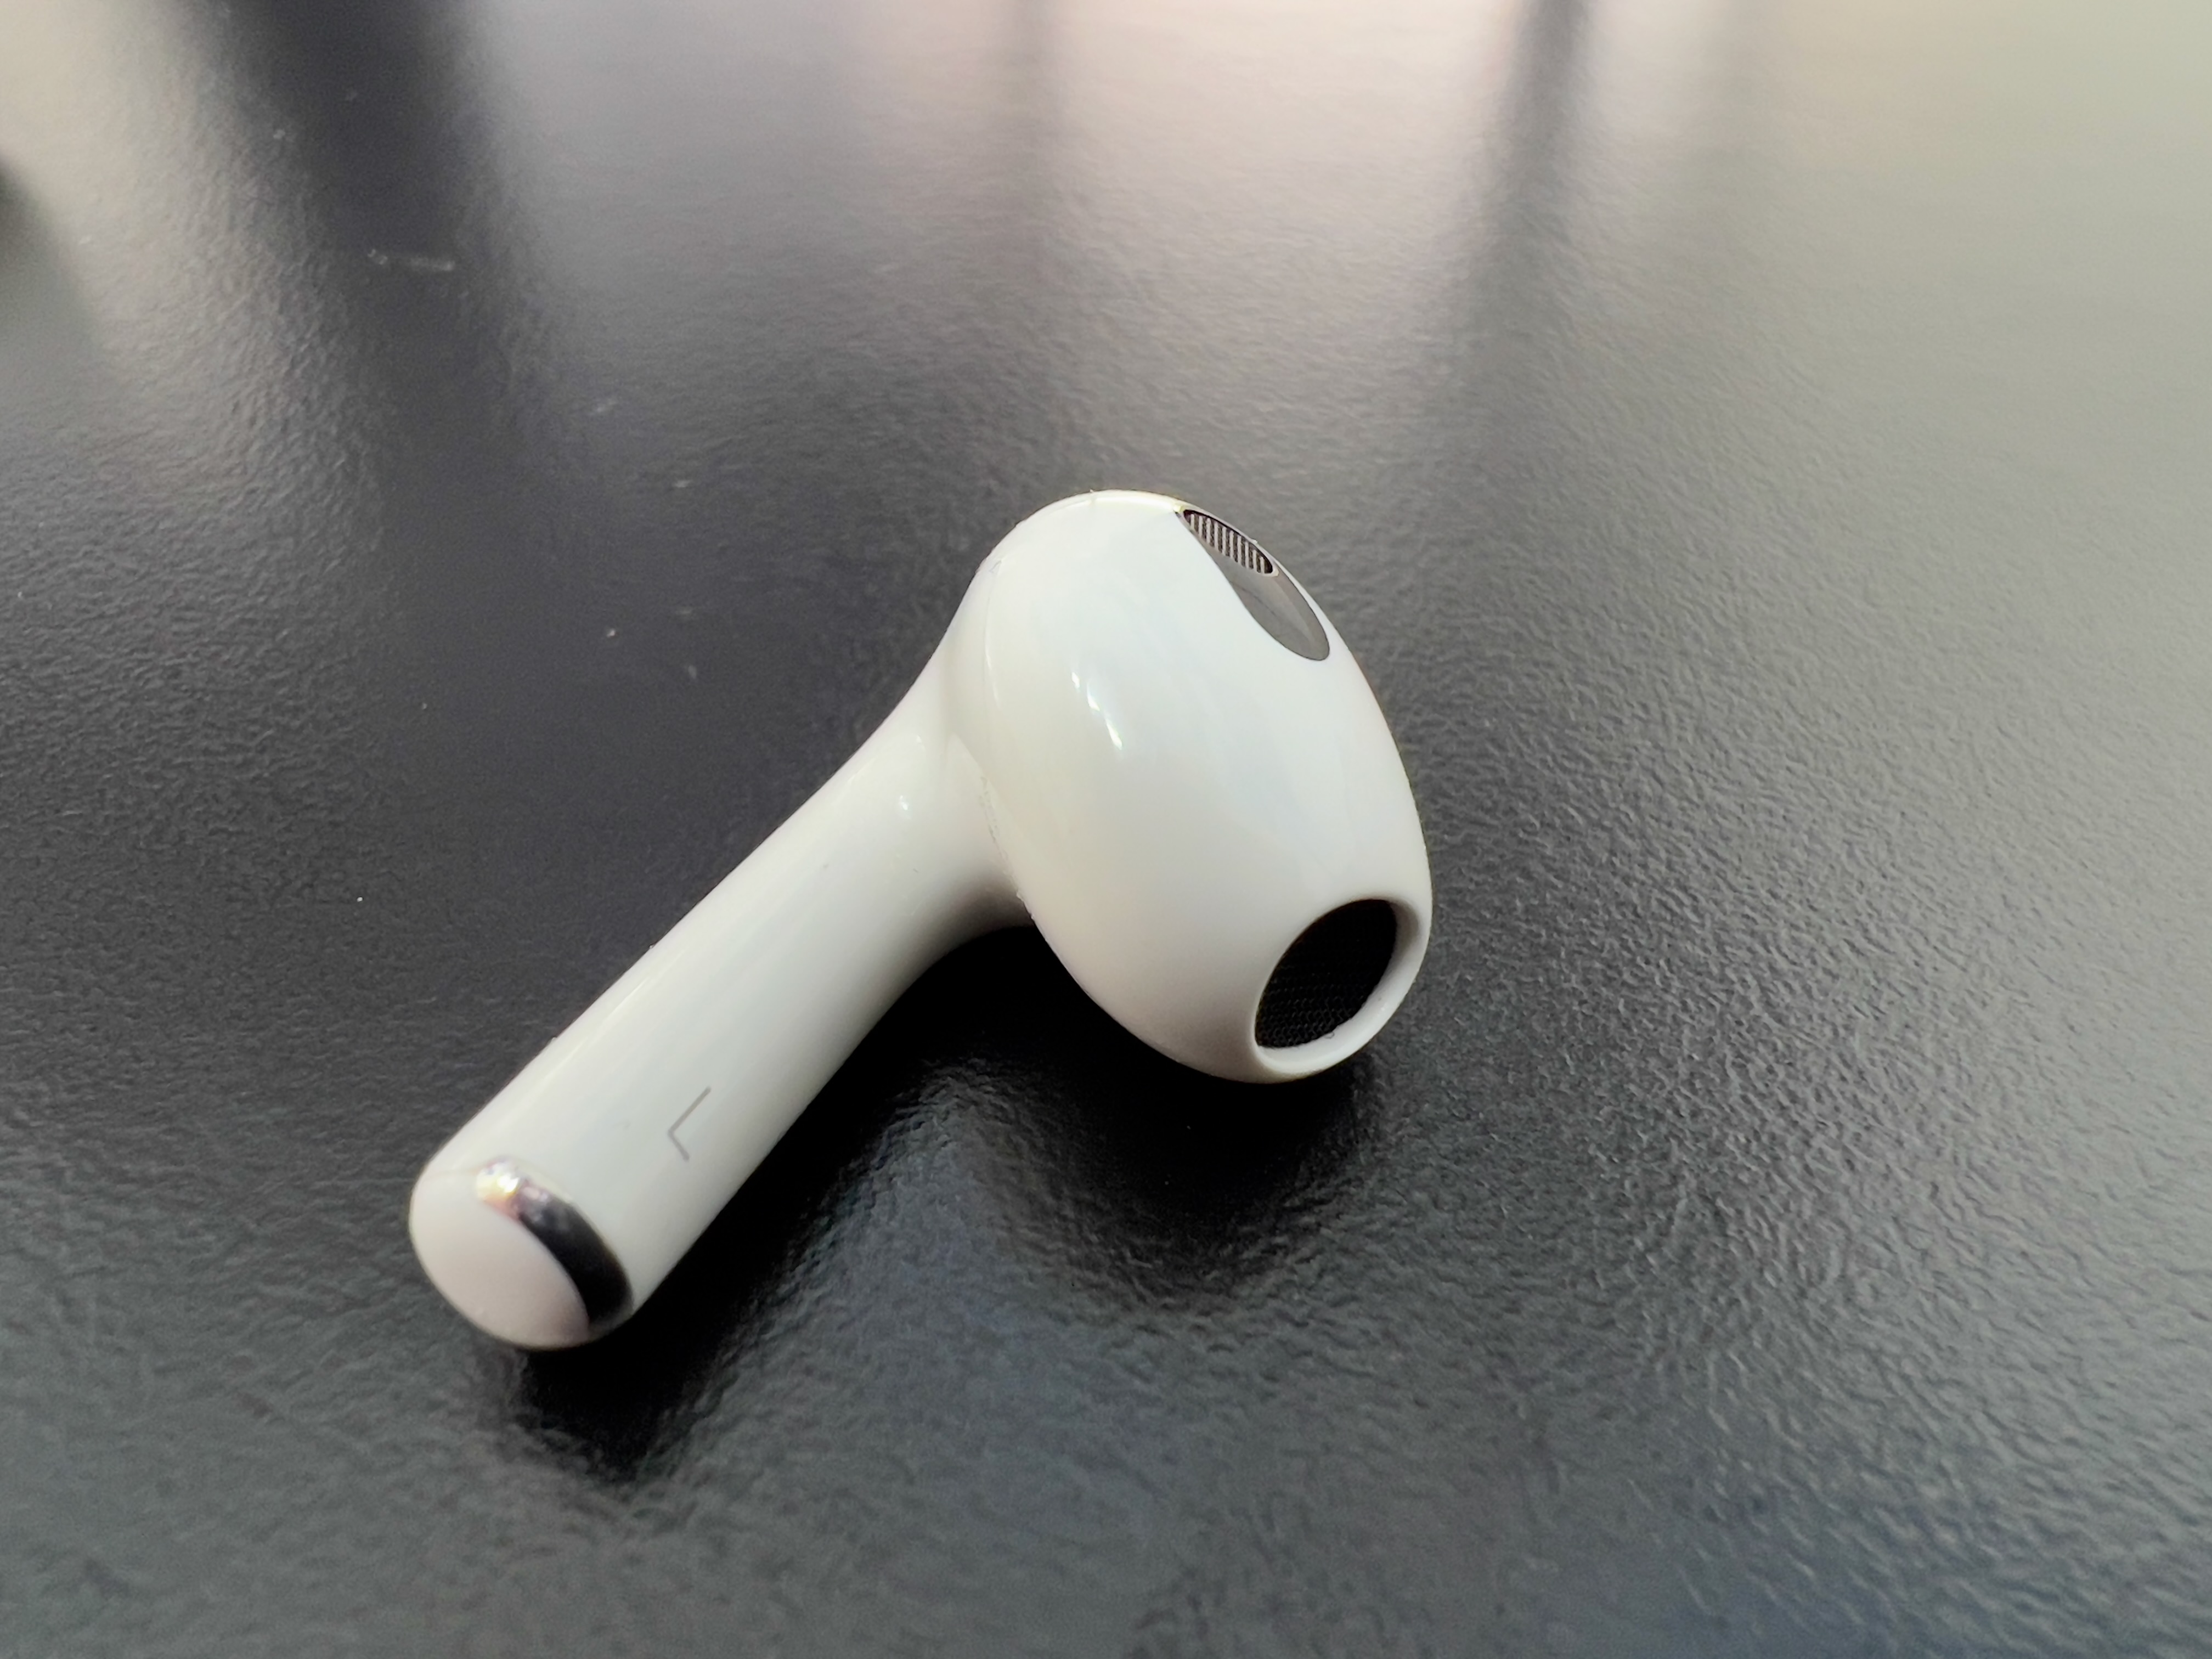 Newest Replacement Charging Case Compatible with AirPod 3rd Generation, Air  pods 3 (Not for Airpod Pro) with Pairing Sync Button Without Earbuds